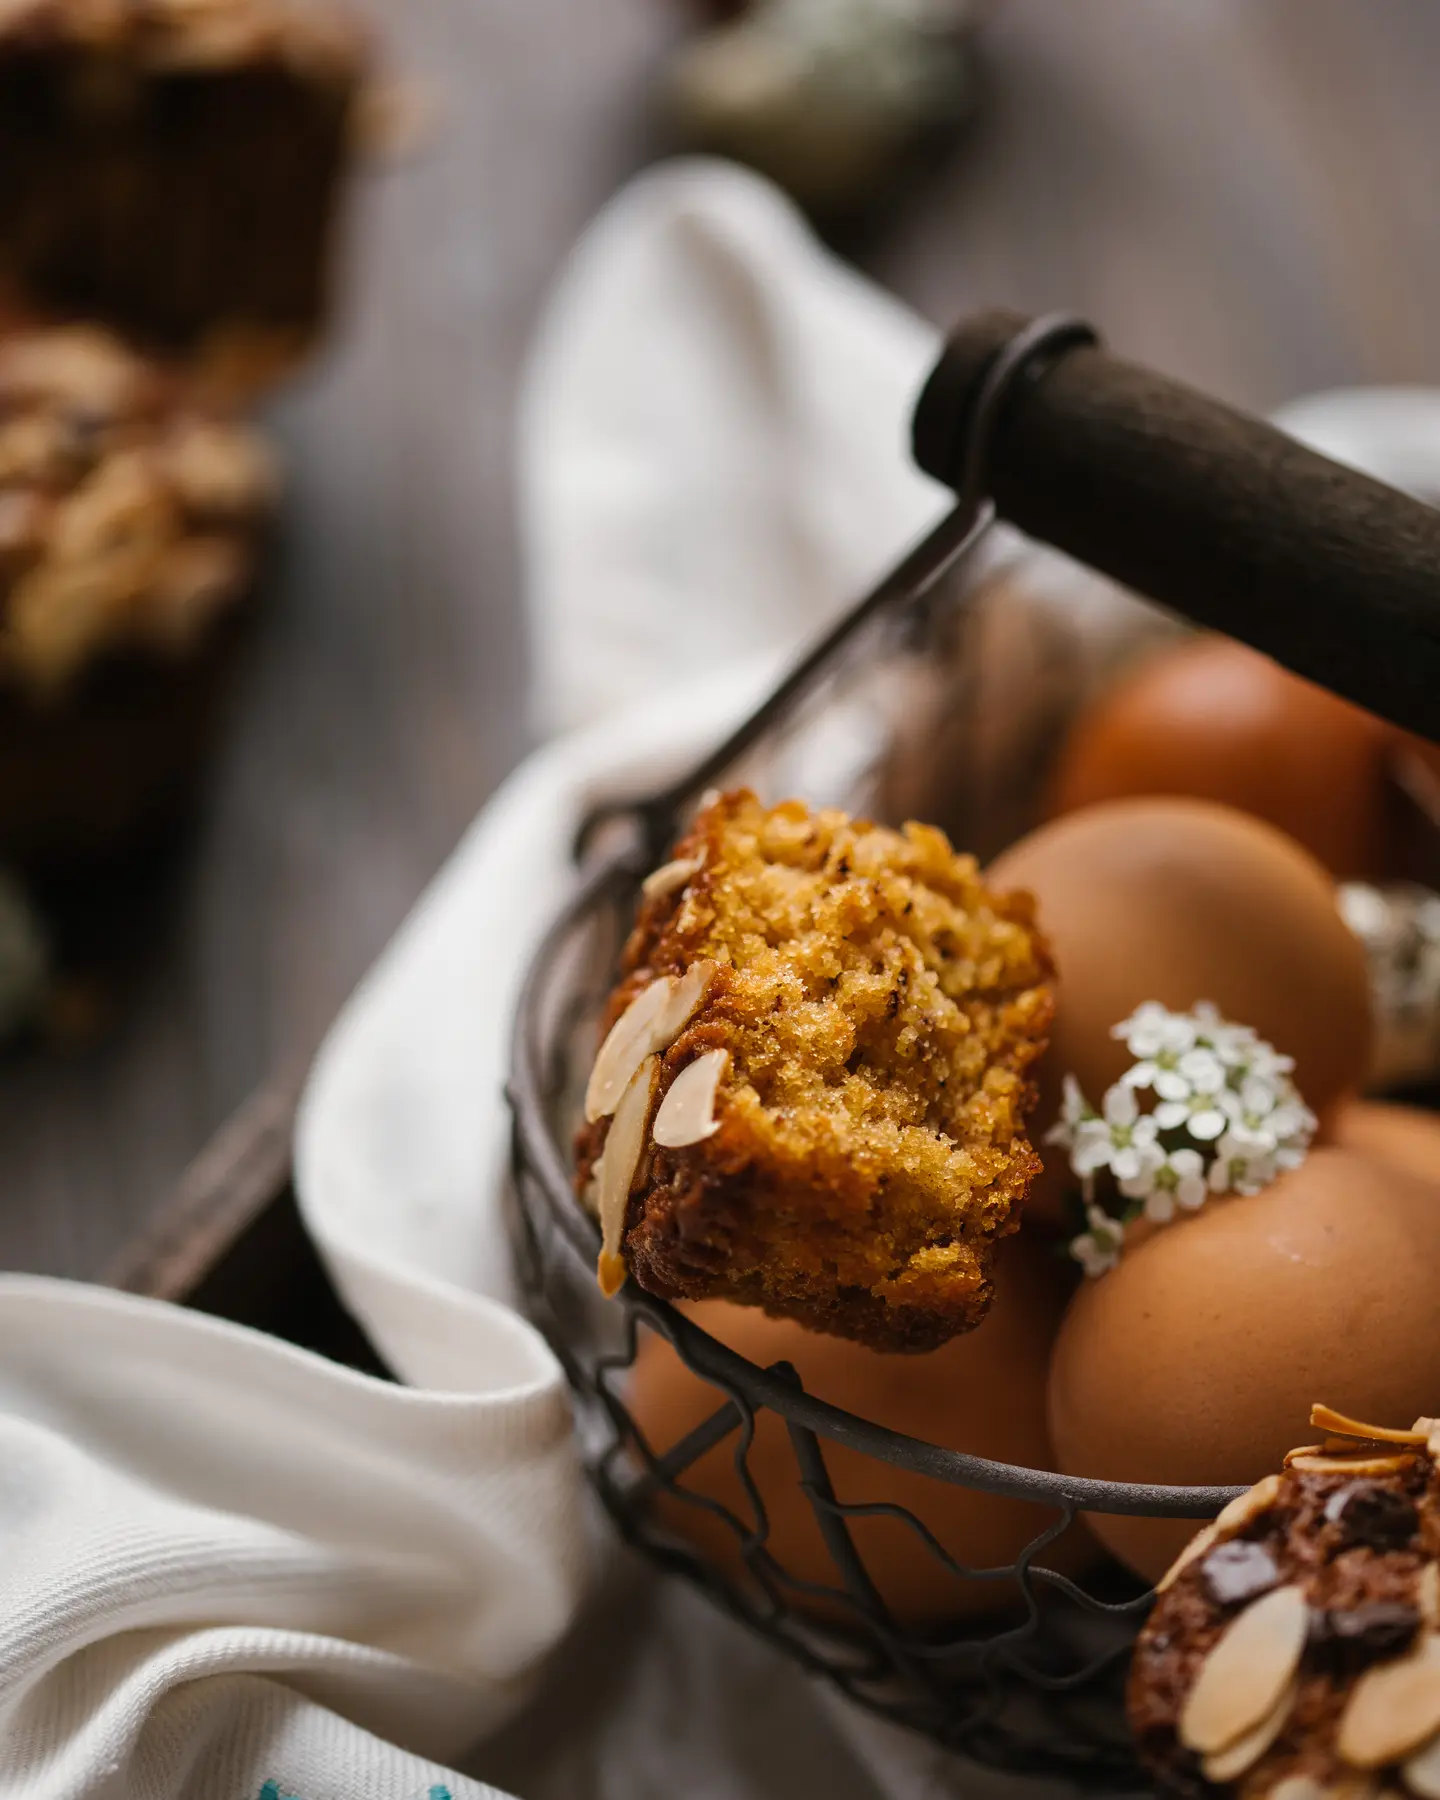 The cupcake is broken and its texture is visible. Chicken eggs are in a metal basket. Under the basket is an embroidered towel. There is a carrot cake in the basket. It is decorated with almond petals. The cupcake is broken and its texture is visible.